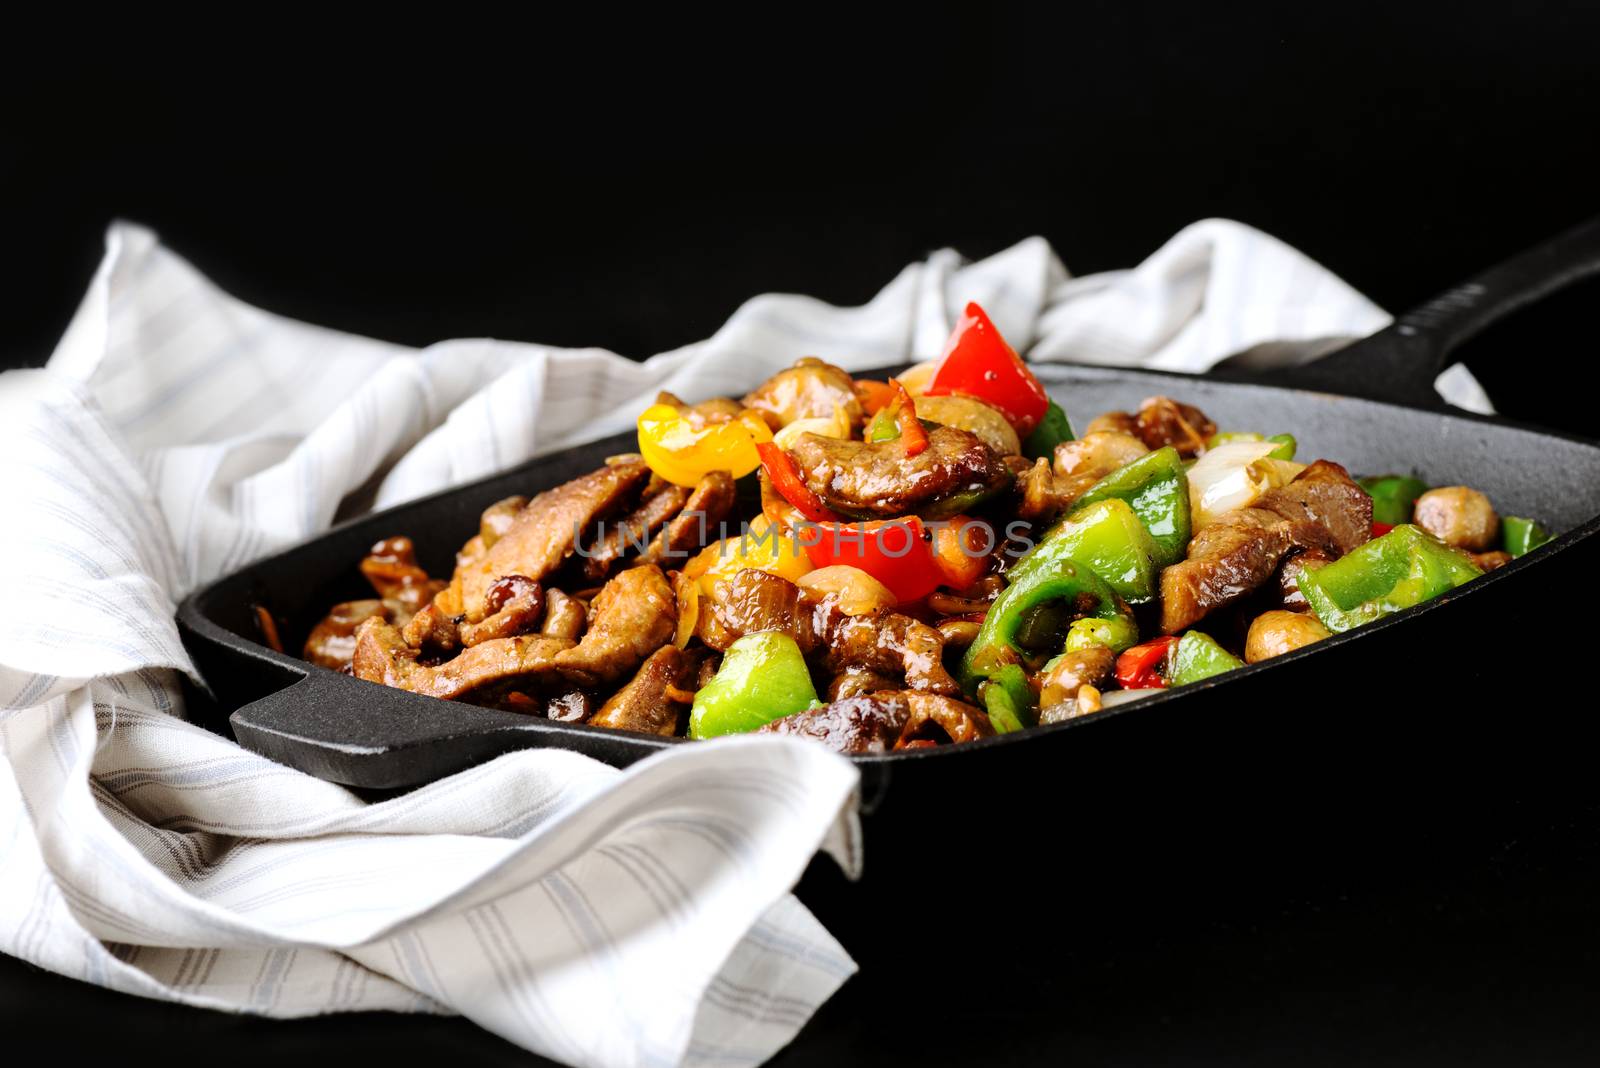 Iron cast skillet with meat and vegetables